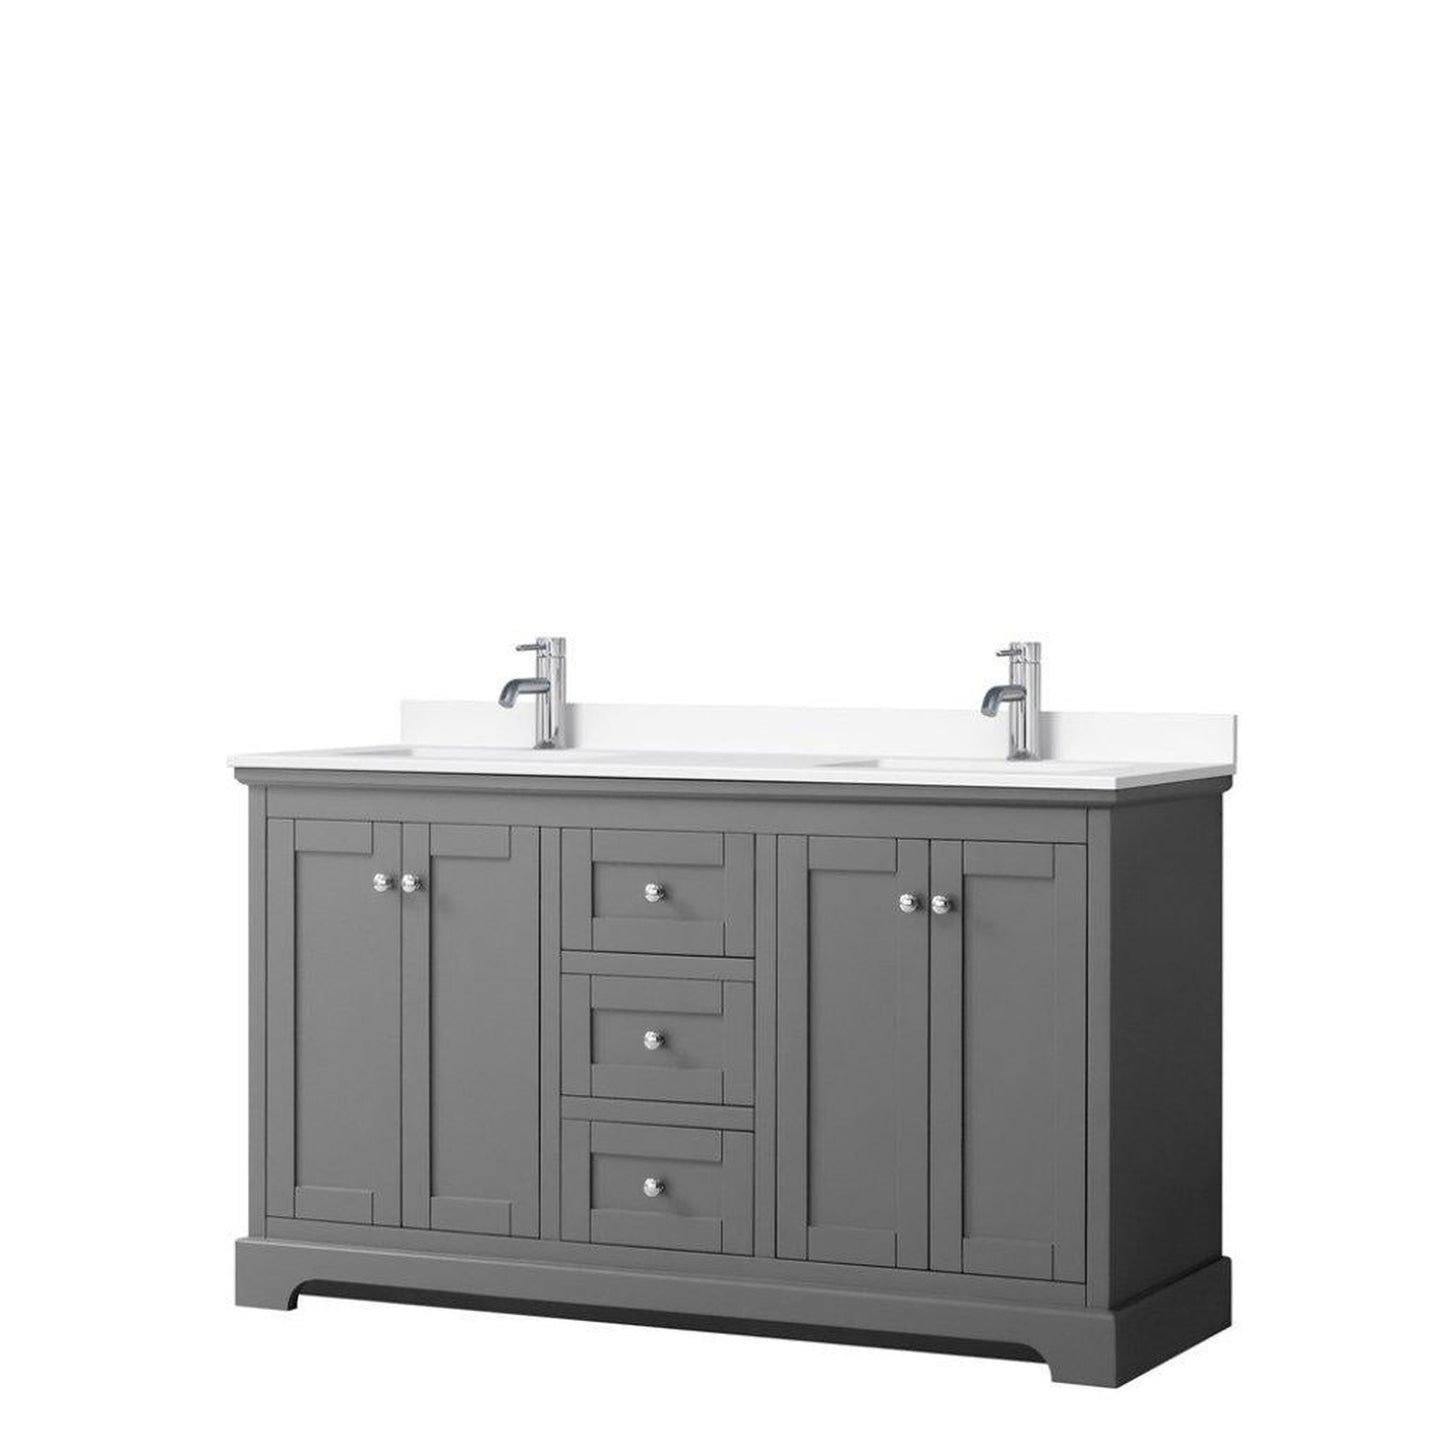 Wyndham Collection Avery 60" Dark Gray Double Bathroom Vanity With White Cultured Marble Countertop With 1-Hole Faucet And Square Sink